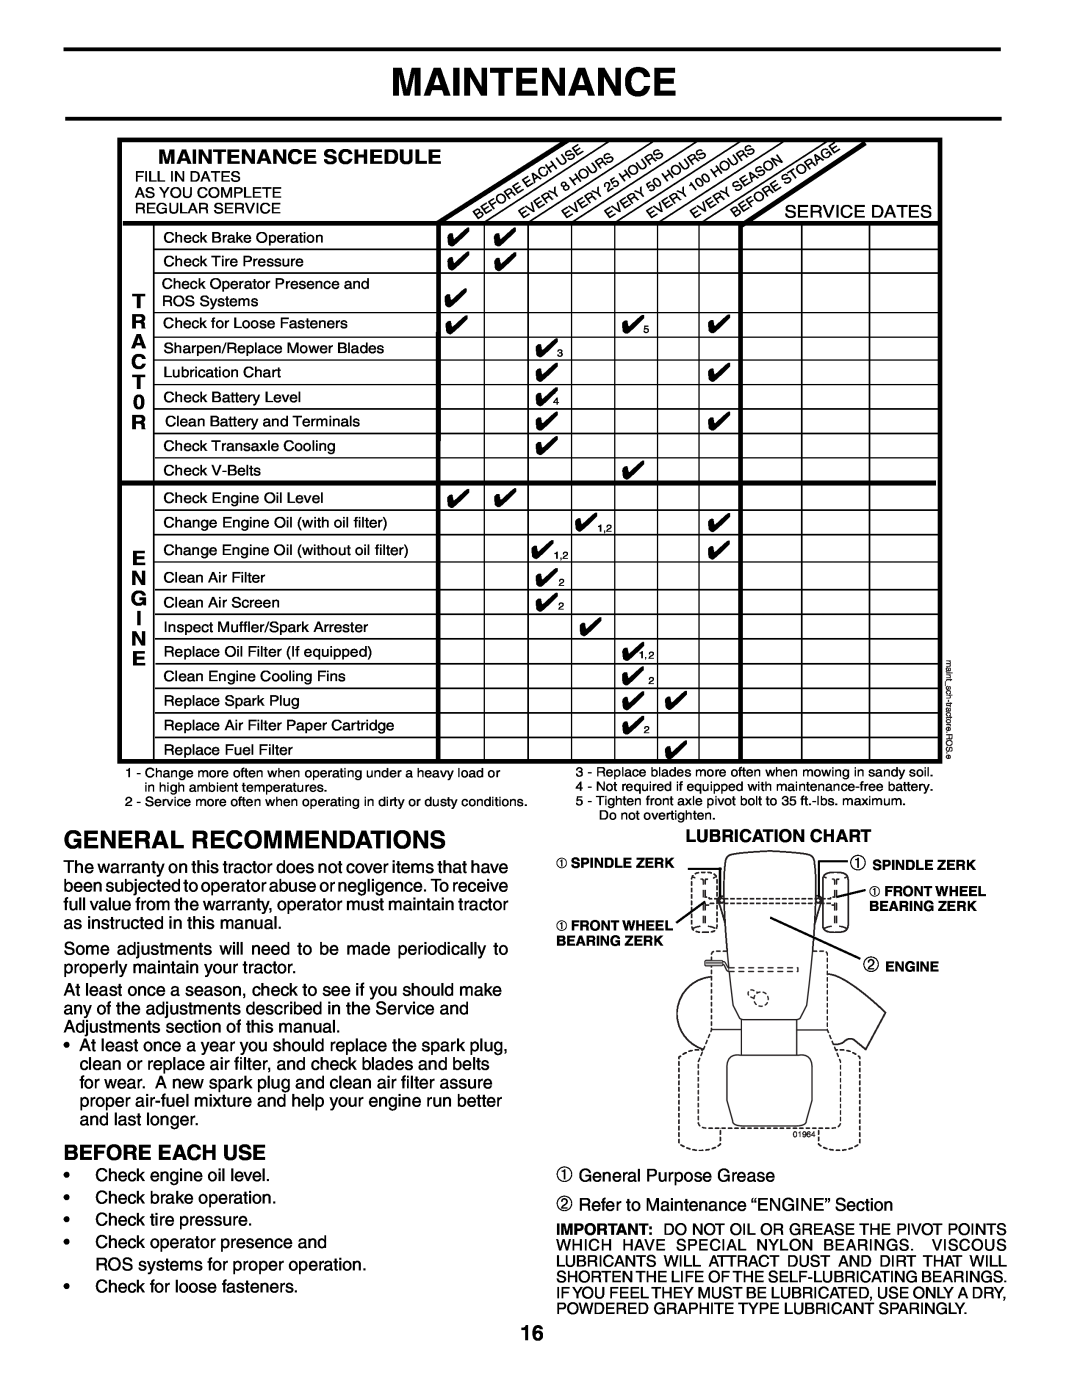 Poulan PD24PH48ST manual General Recommendations, Before Each Use, Maintenance Schedule 